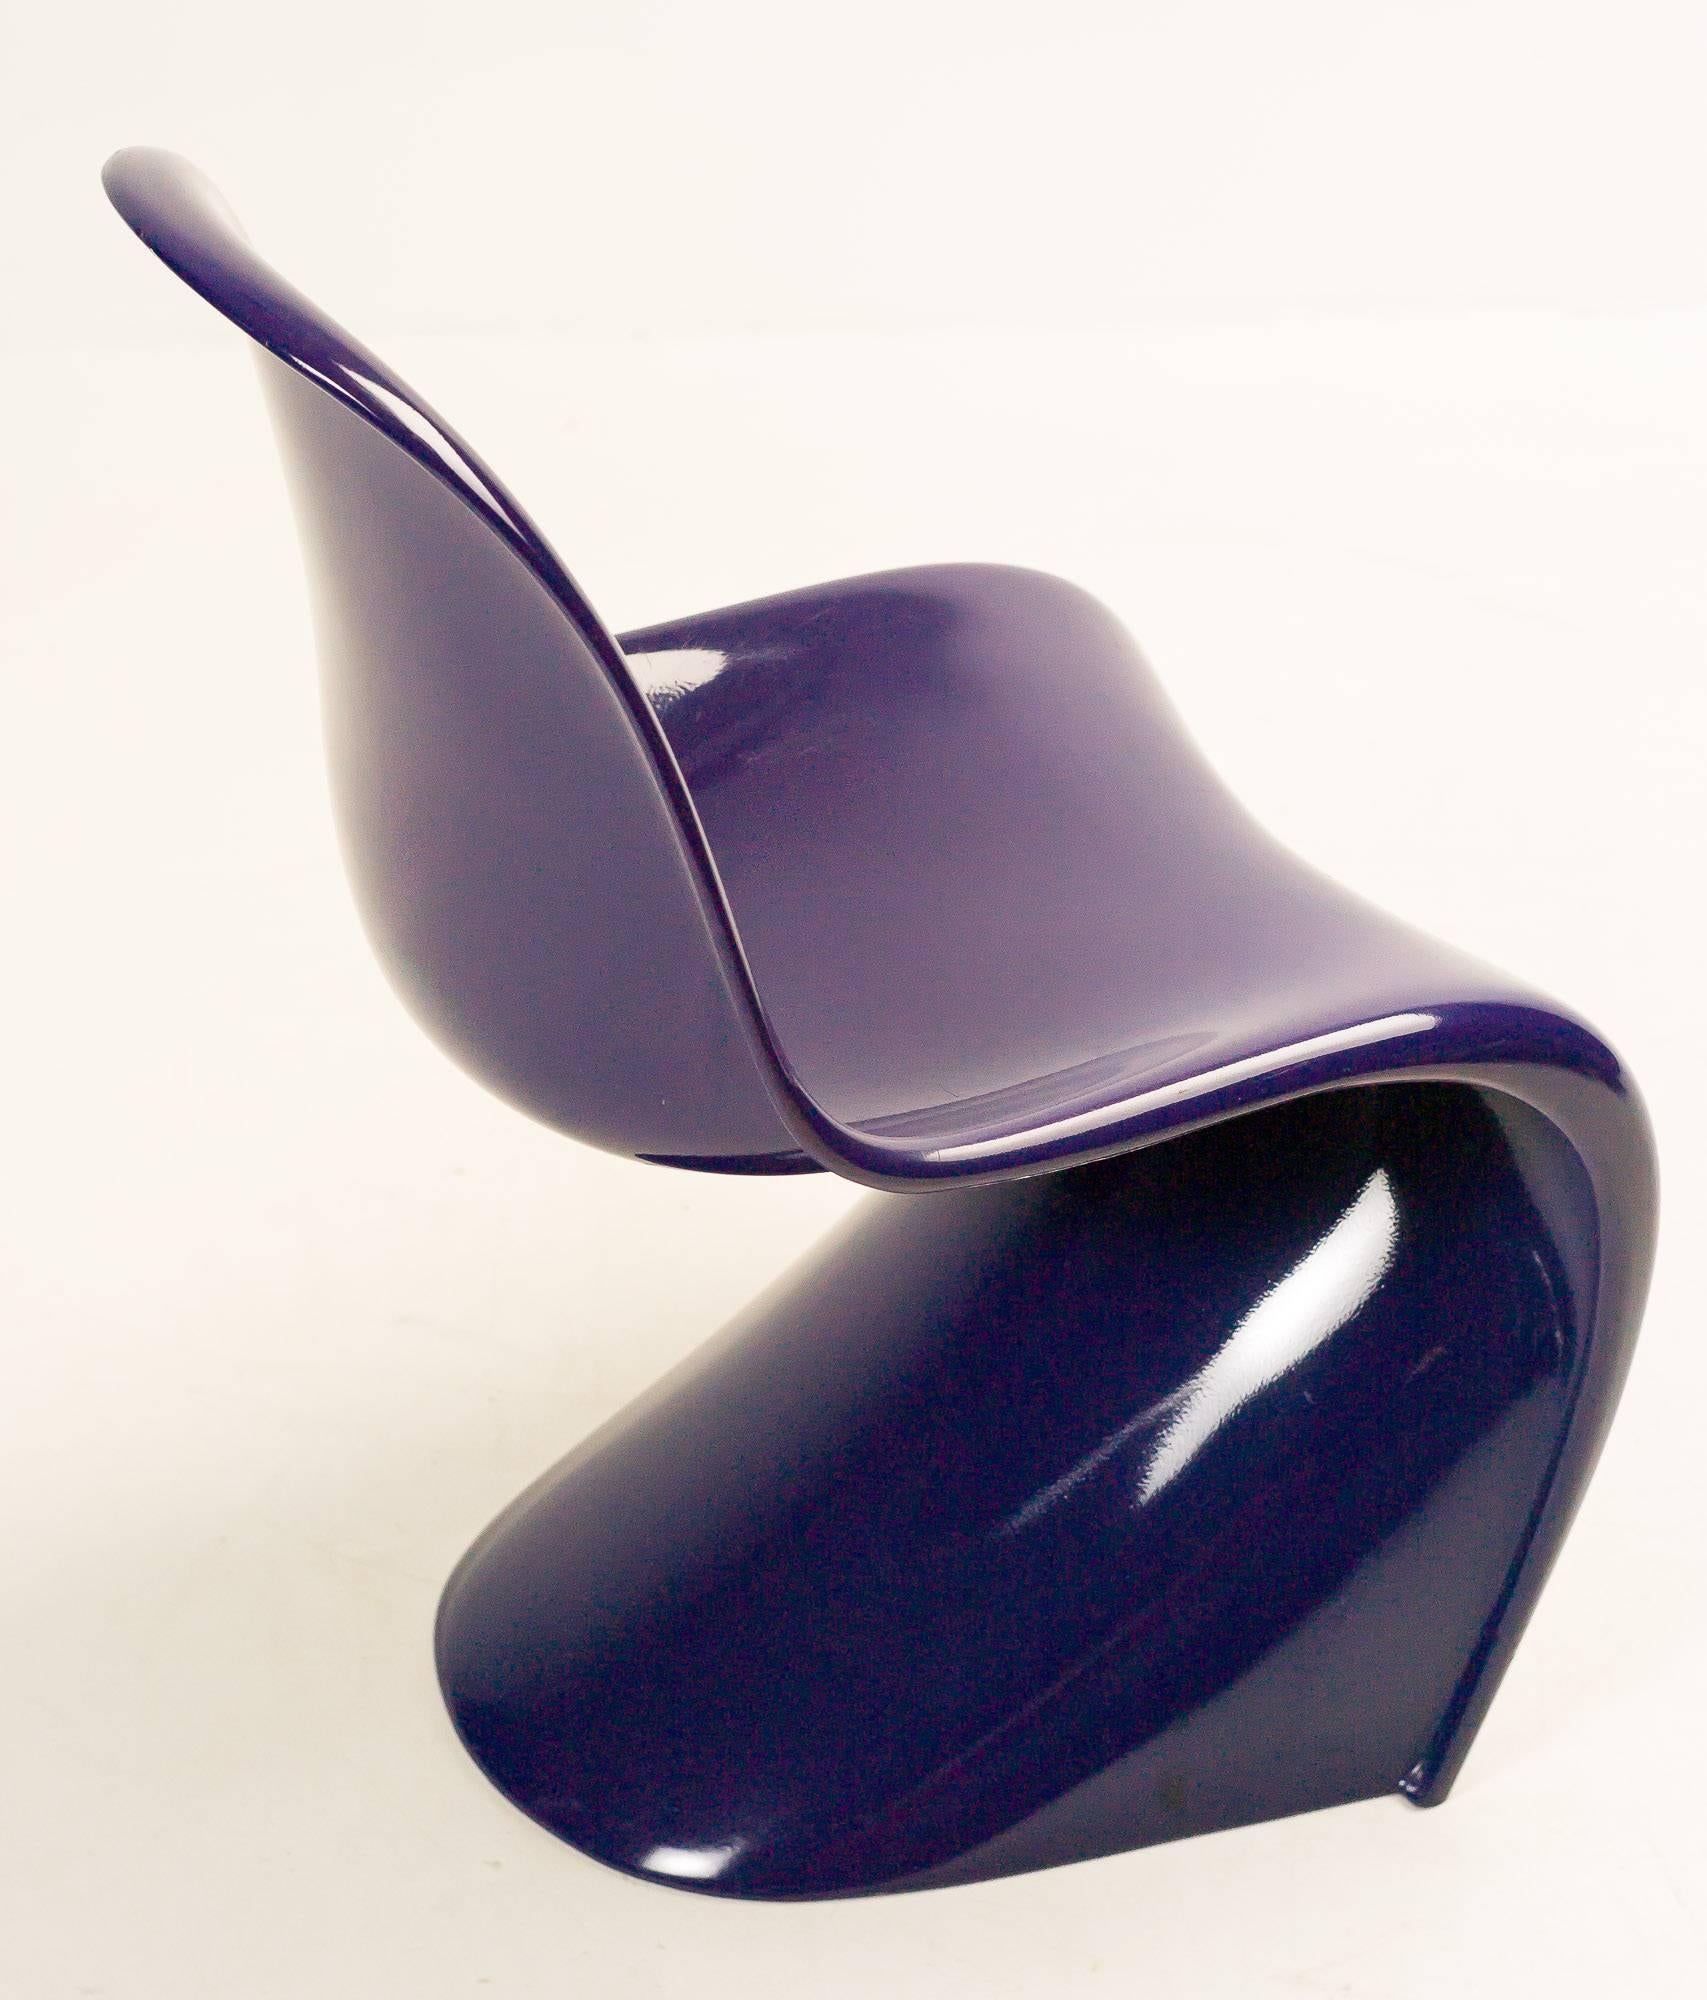 Designed in 1958-1967 by Verner Panton. This slender, rare first series of the famous Panton chair was produced by Herman Miller in 1968. Polyurethane hard foam (Baydur) painted purple. Bottom of two chairs marked with Herman Miller stickers.